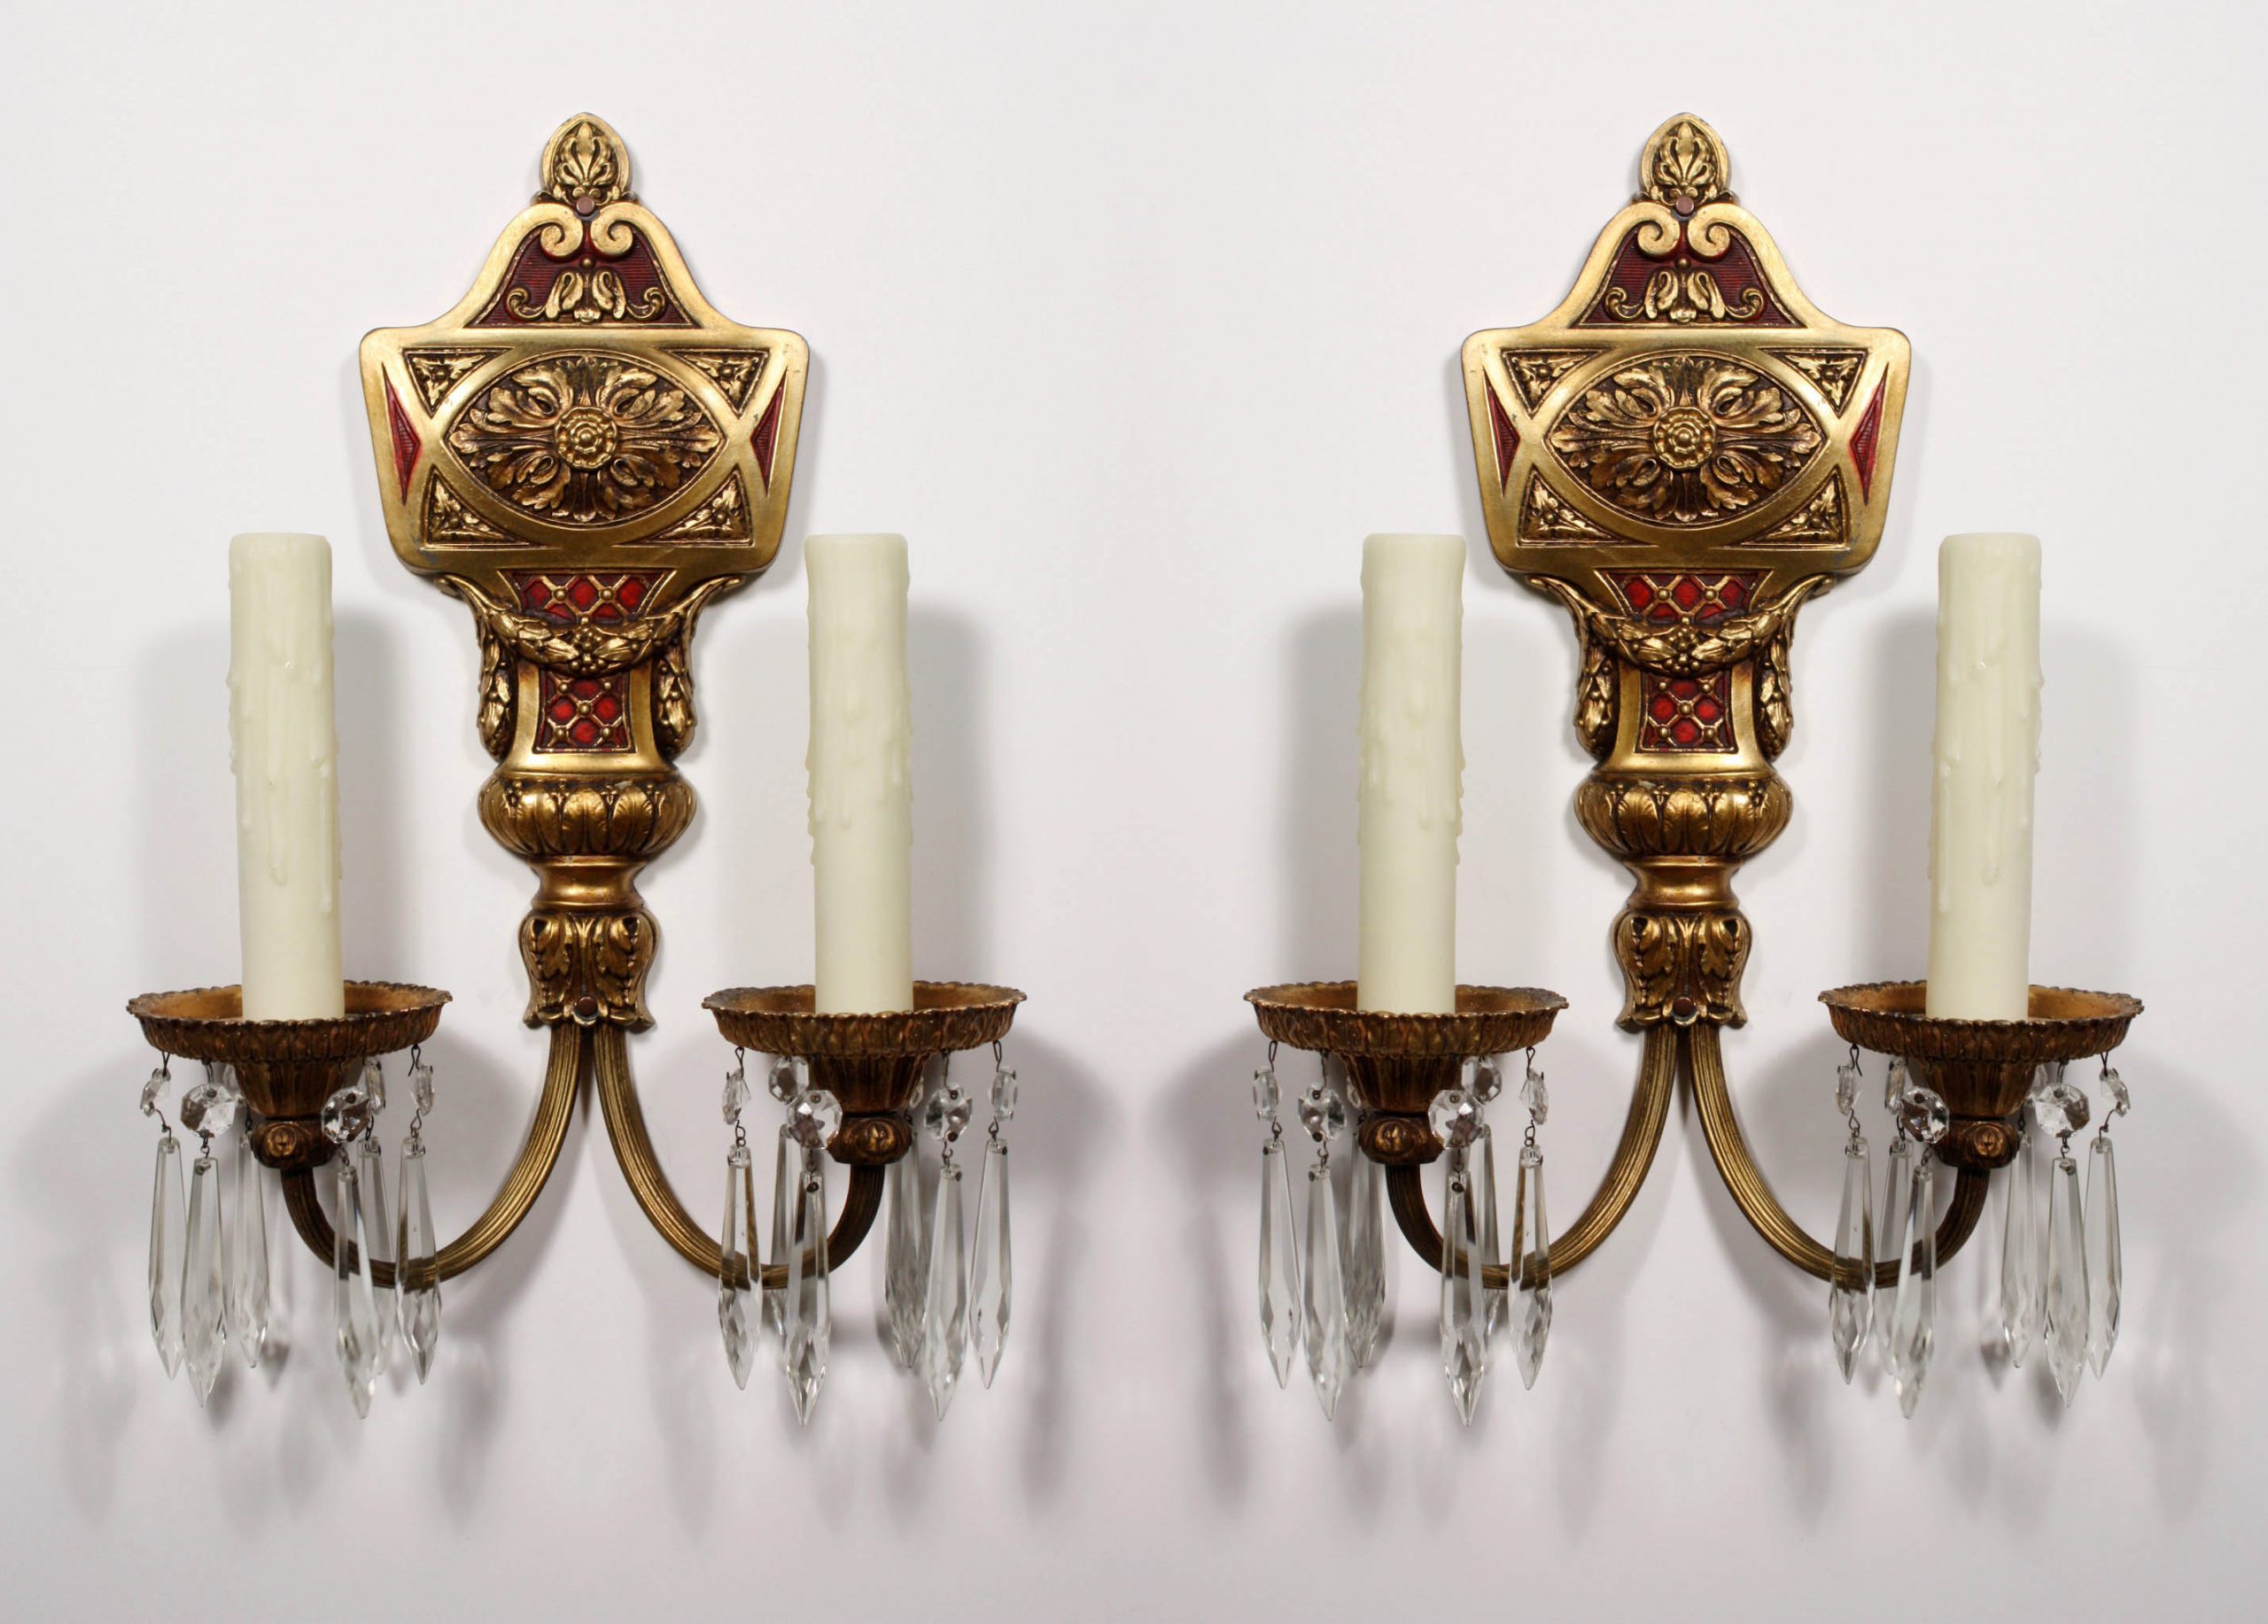 SOLD Outstanding Pair of Antique Georgian Double-Arm Sconces with Prisms, Original Red Polychrome Finish-0